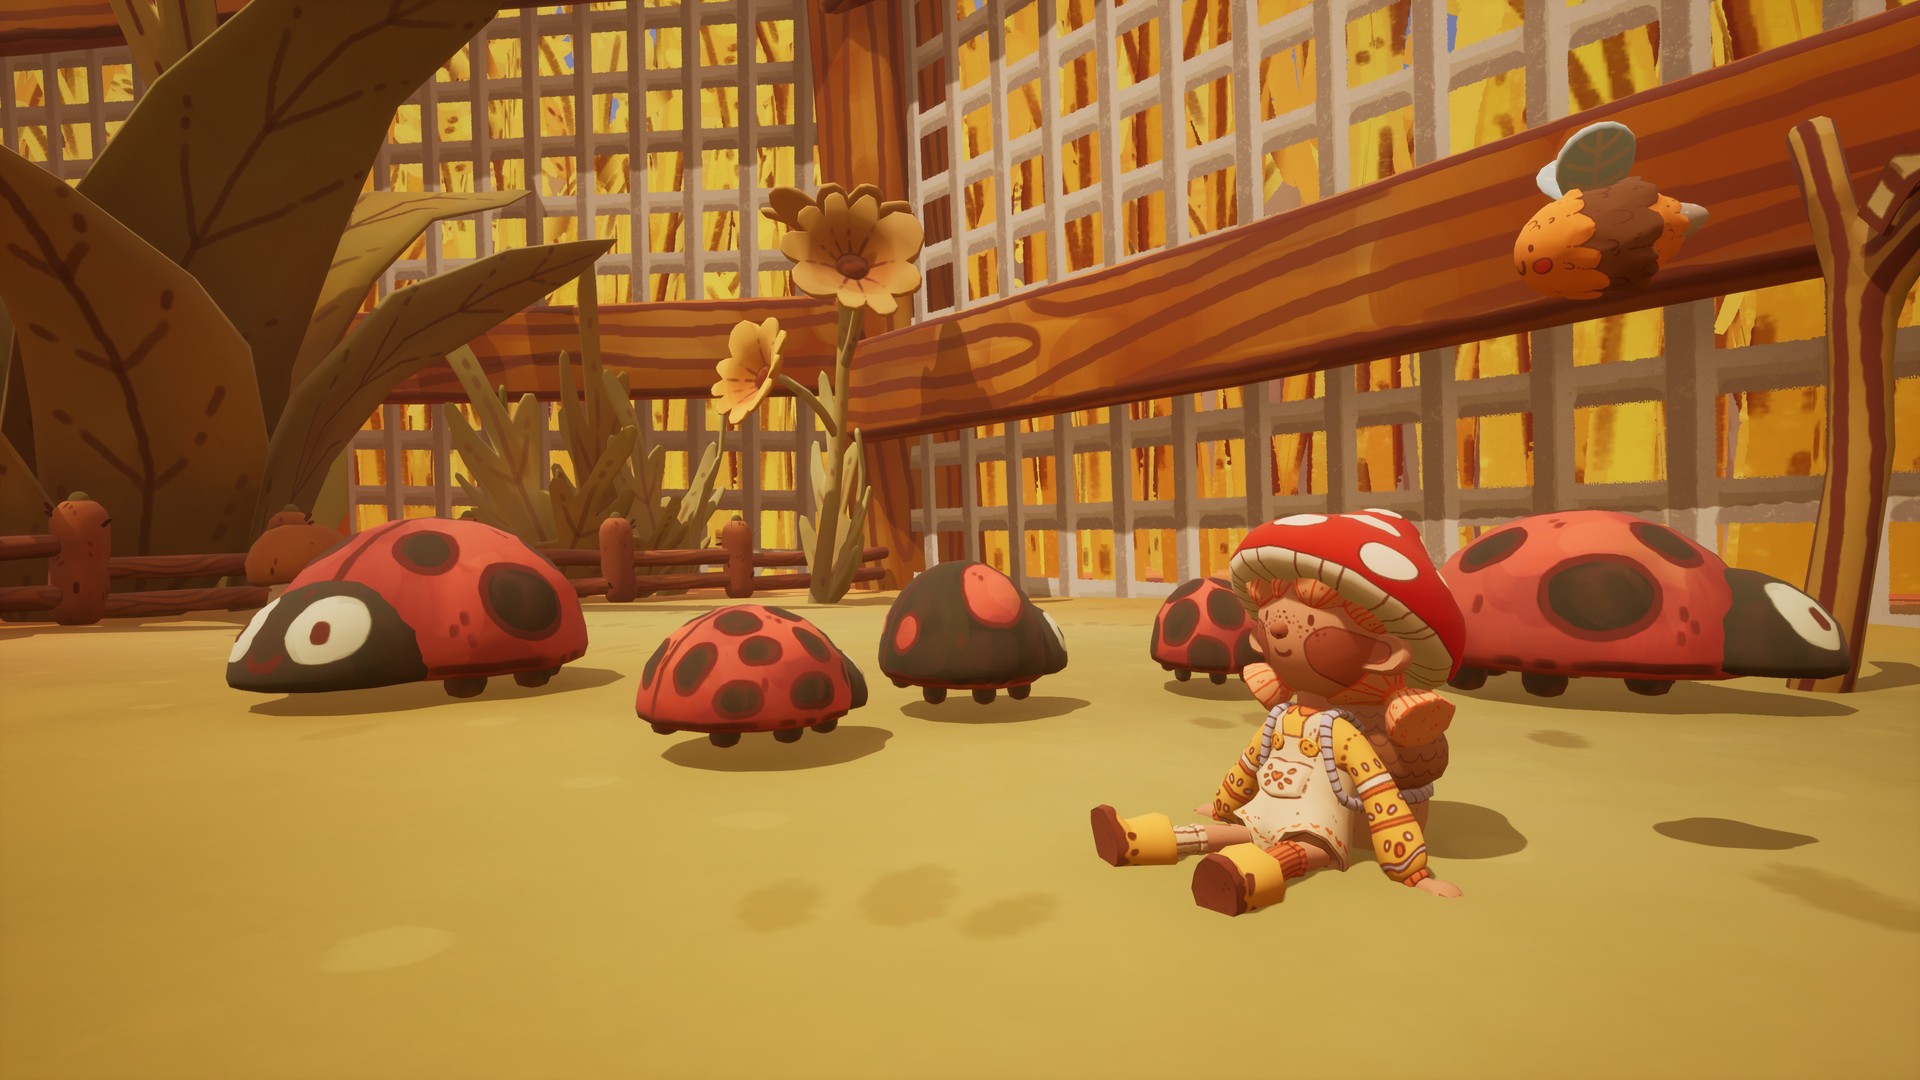 Be a mushroom postal worker delivering to woodland animals in this cozy platformer